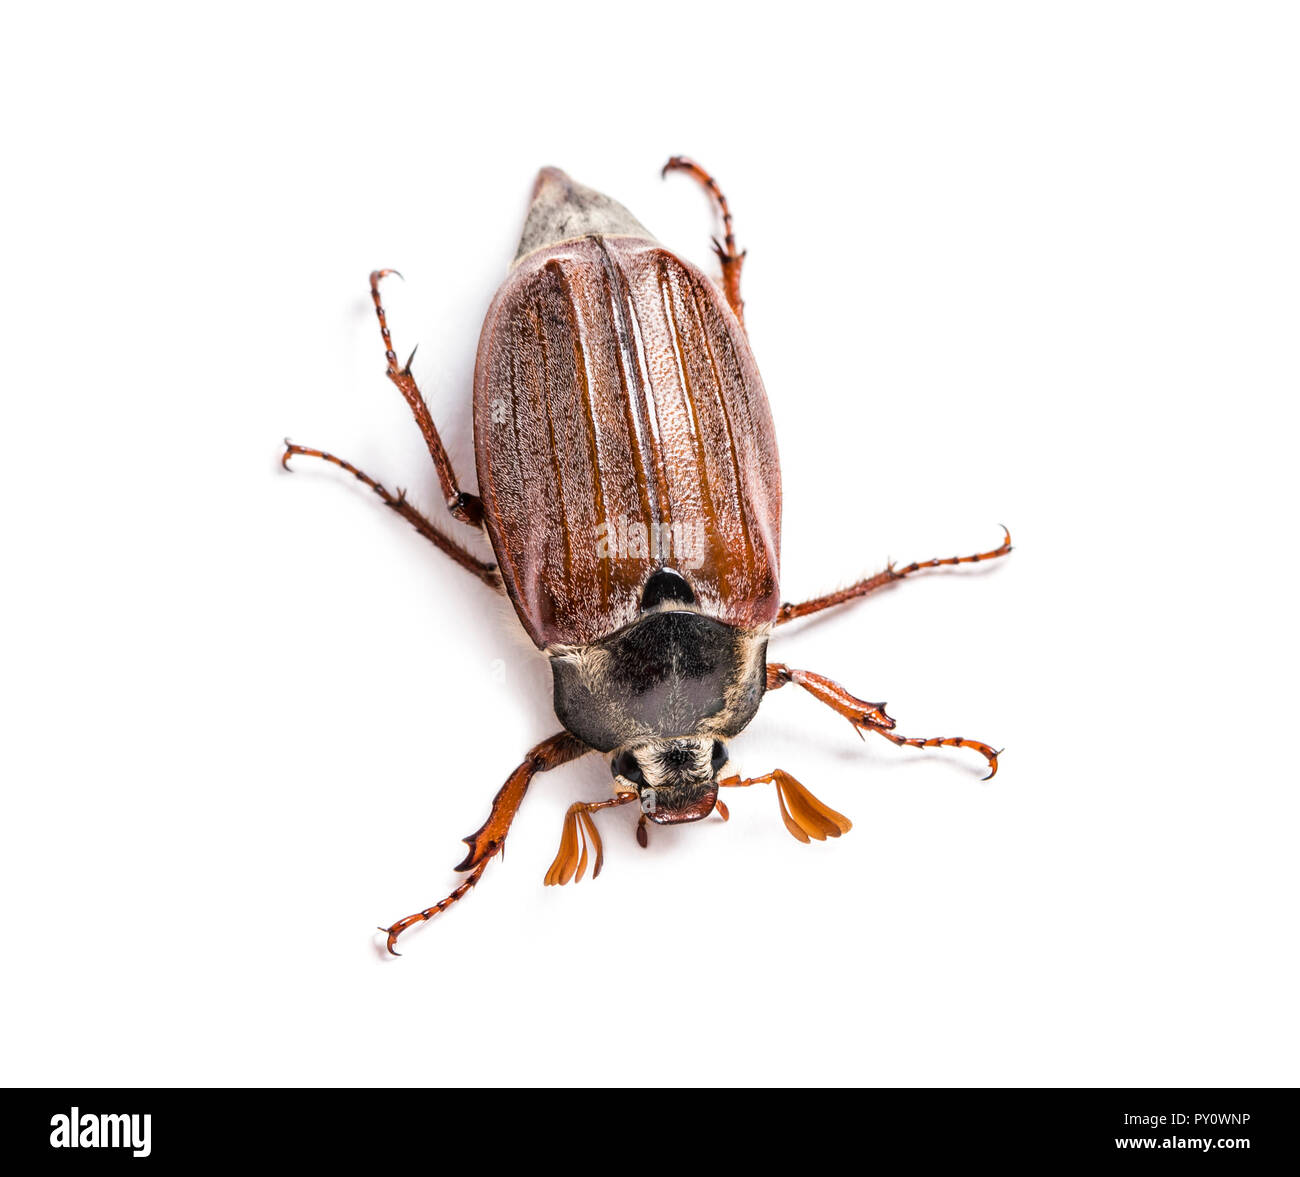 Summer chafer or European june beetle, Amphimallon solstitiale, in front of white background Stock Photo